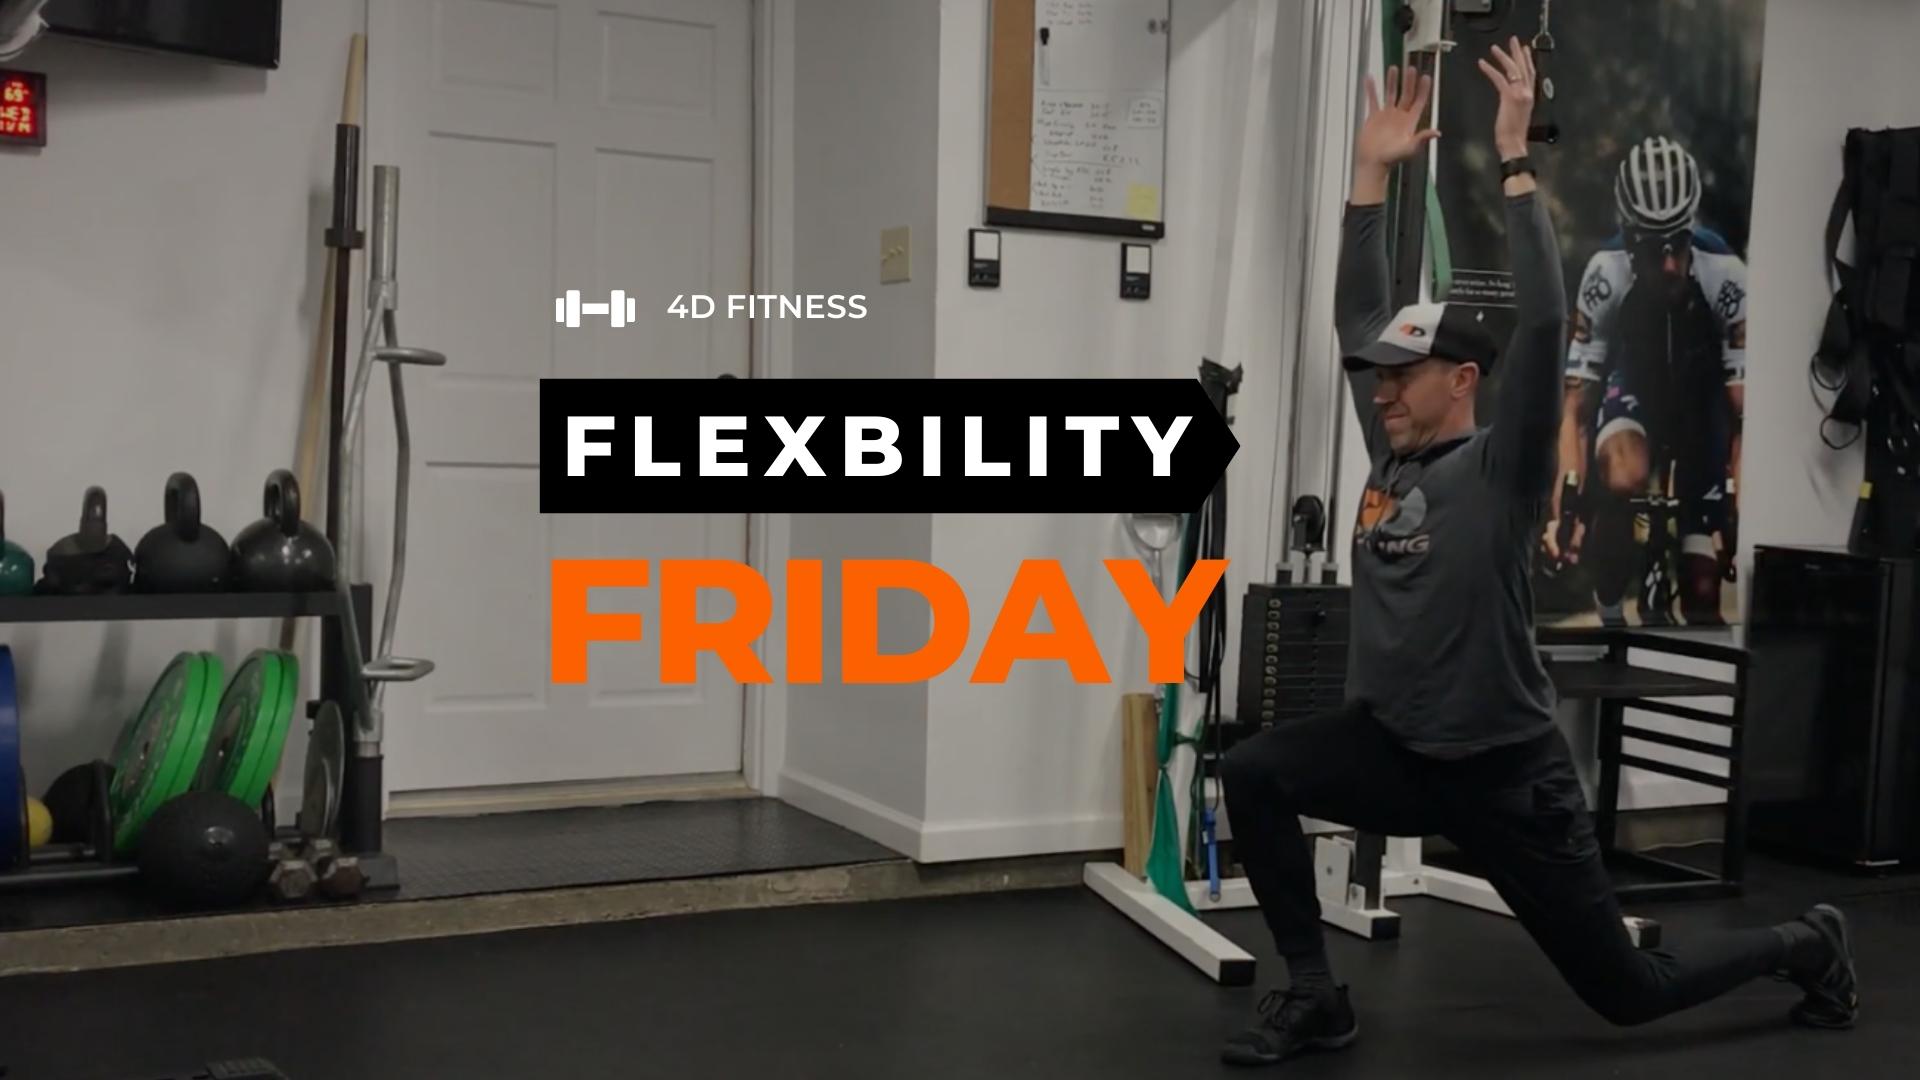 Flexibility Friday: World’s Greatest Stretching Exercises With Coach Will: